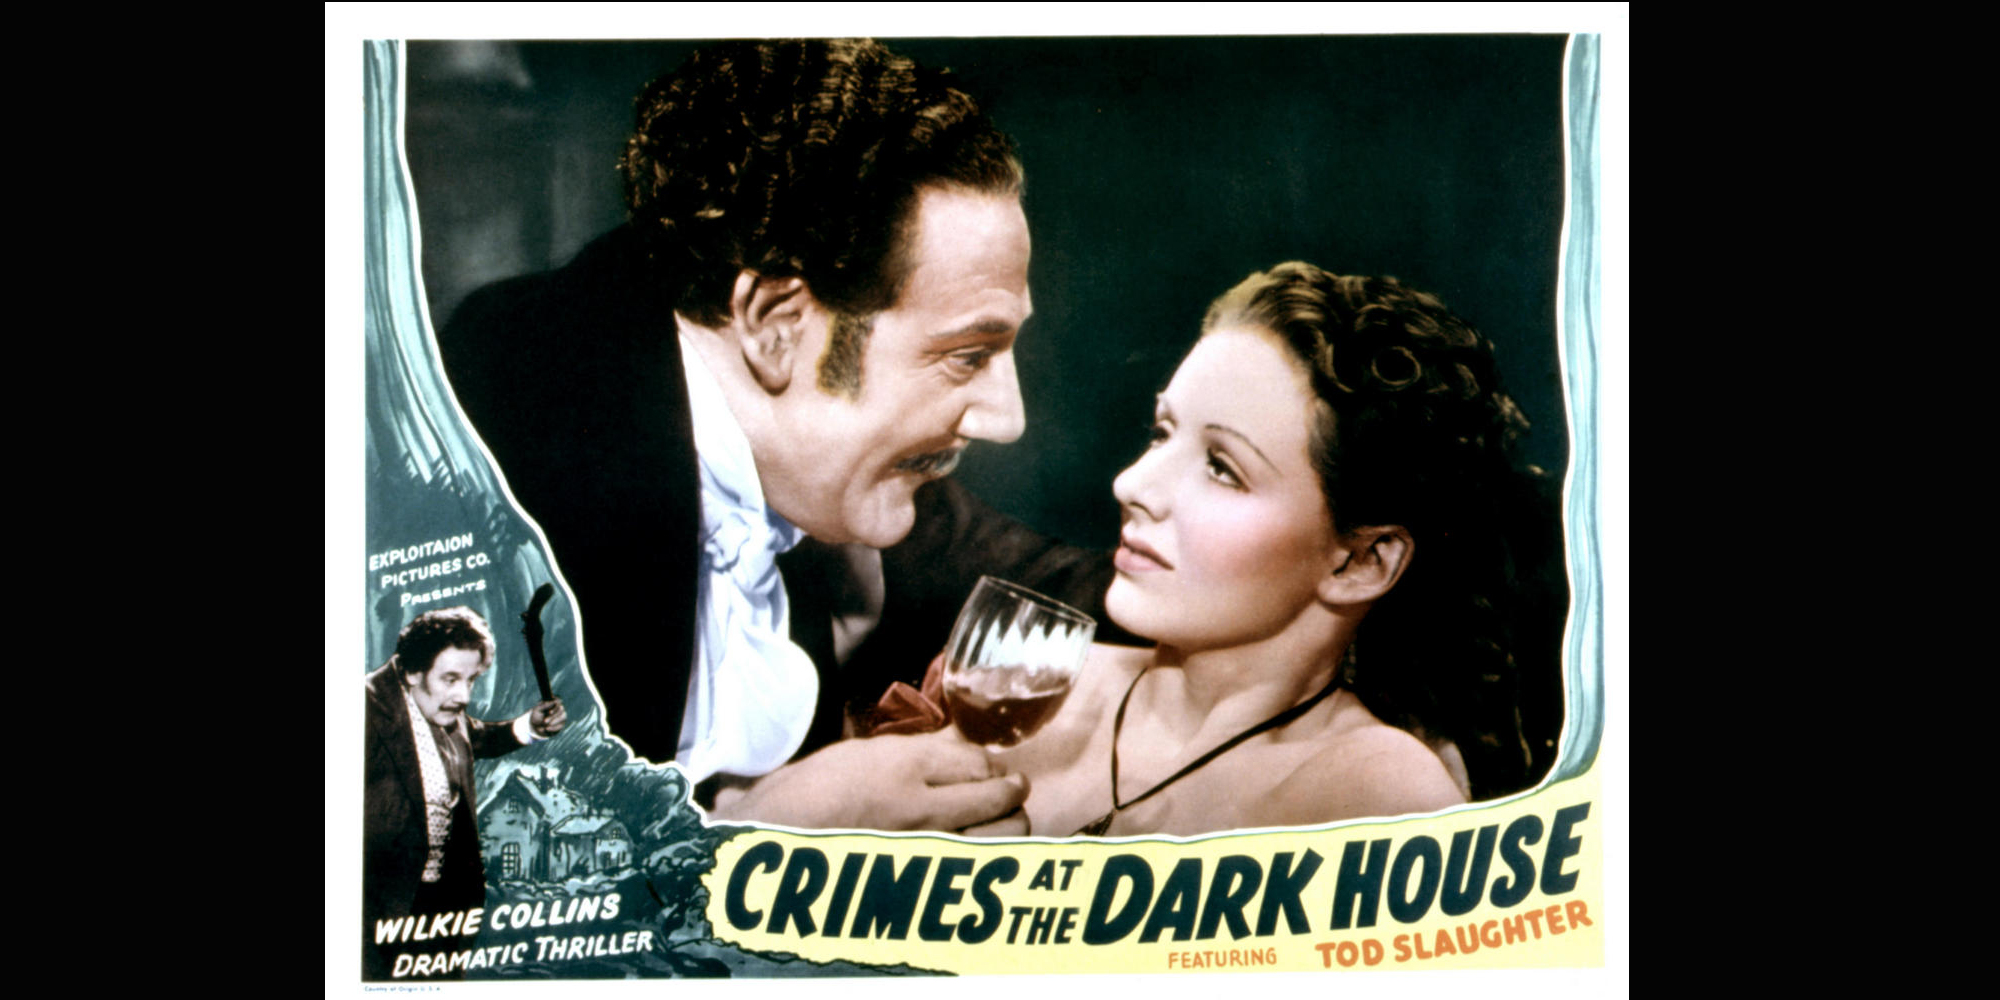 'Crimes at the Dark House' film poster 1940 Book of the Week: The Woman in White